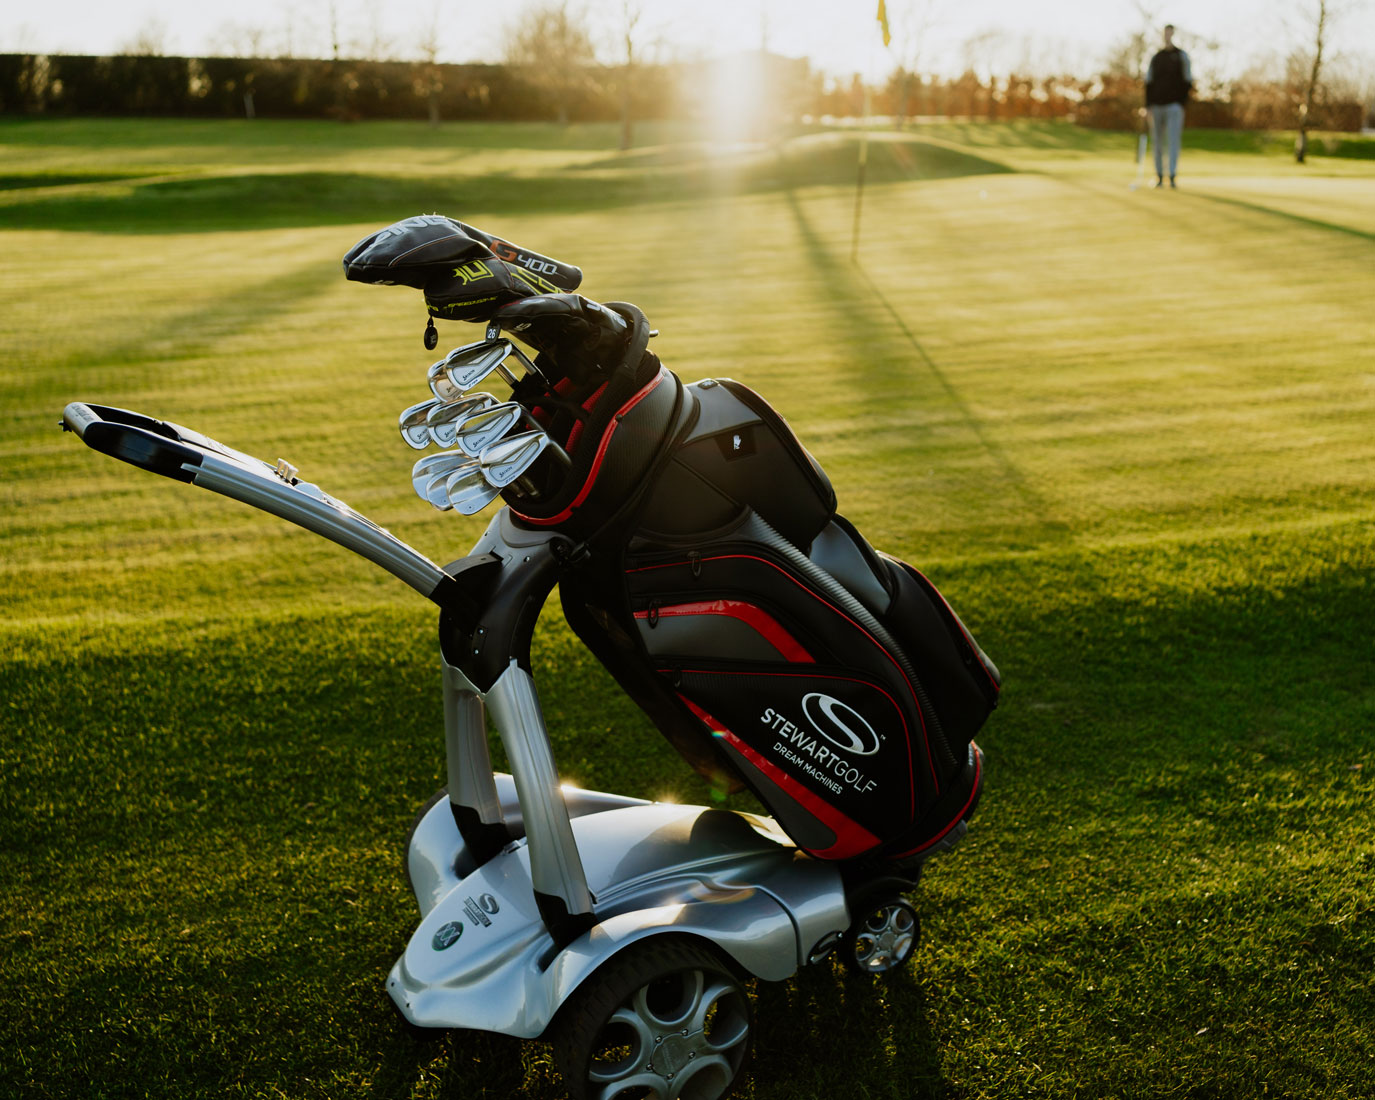 NEWS: Stewart Golf launches latest version of its X series - the X10